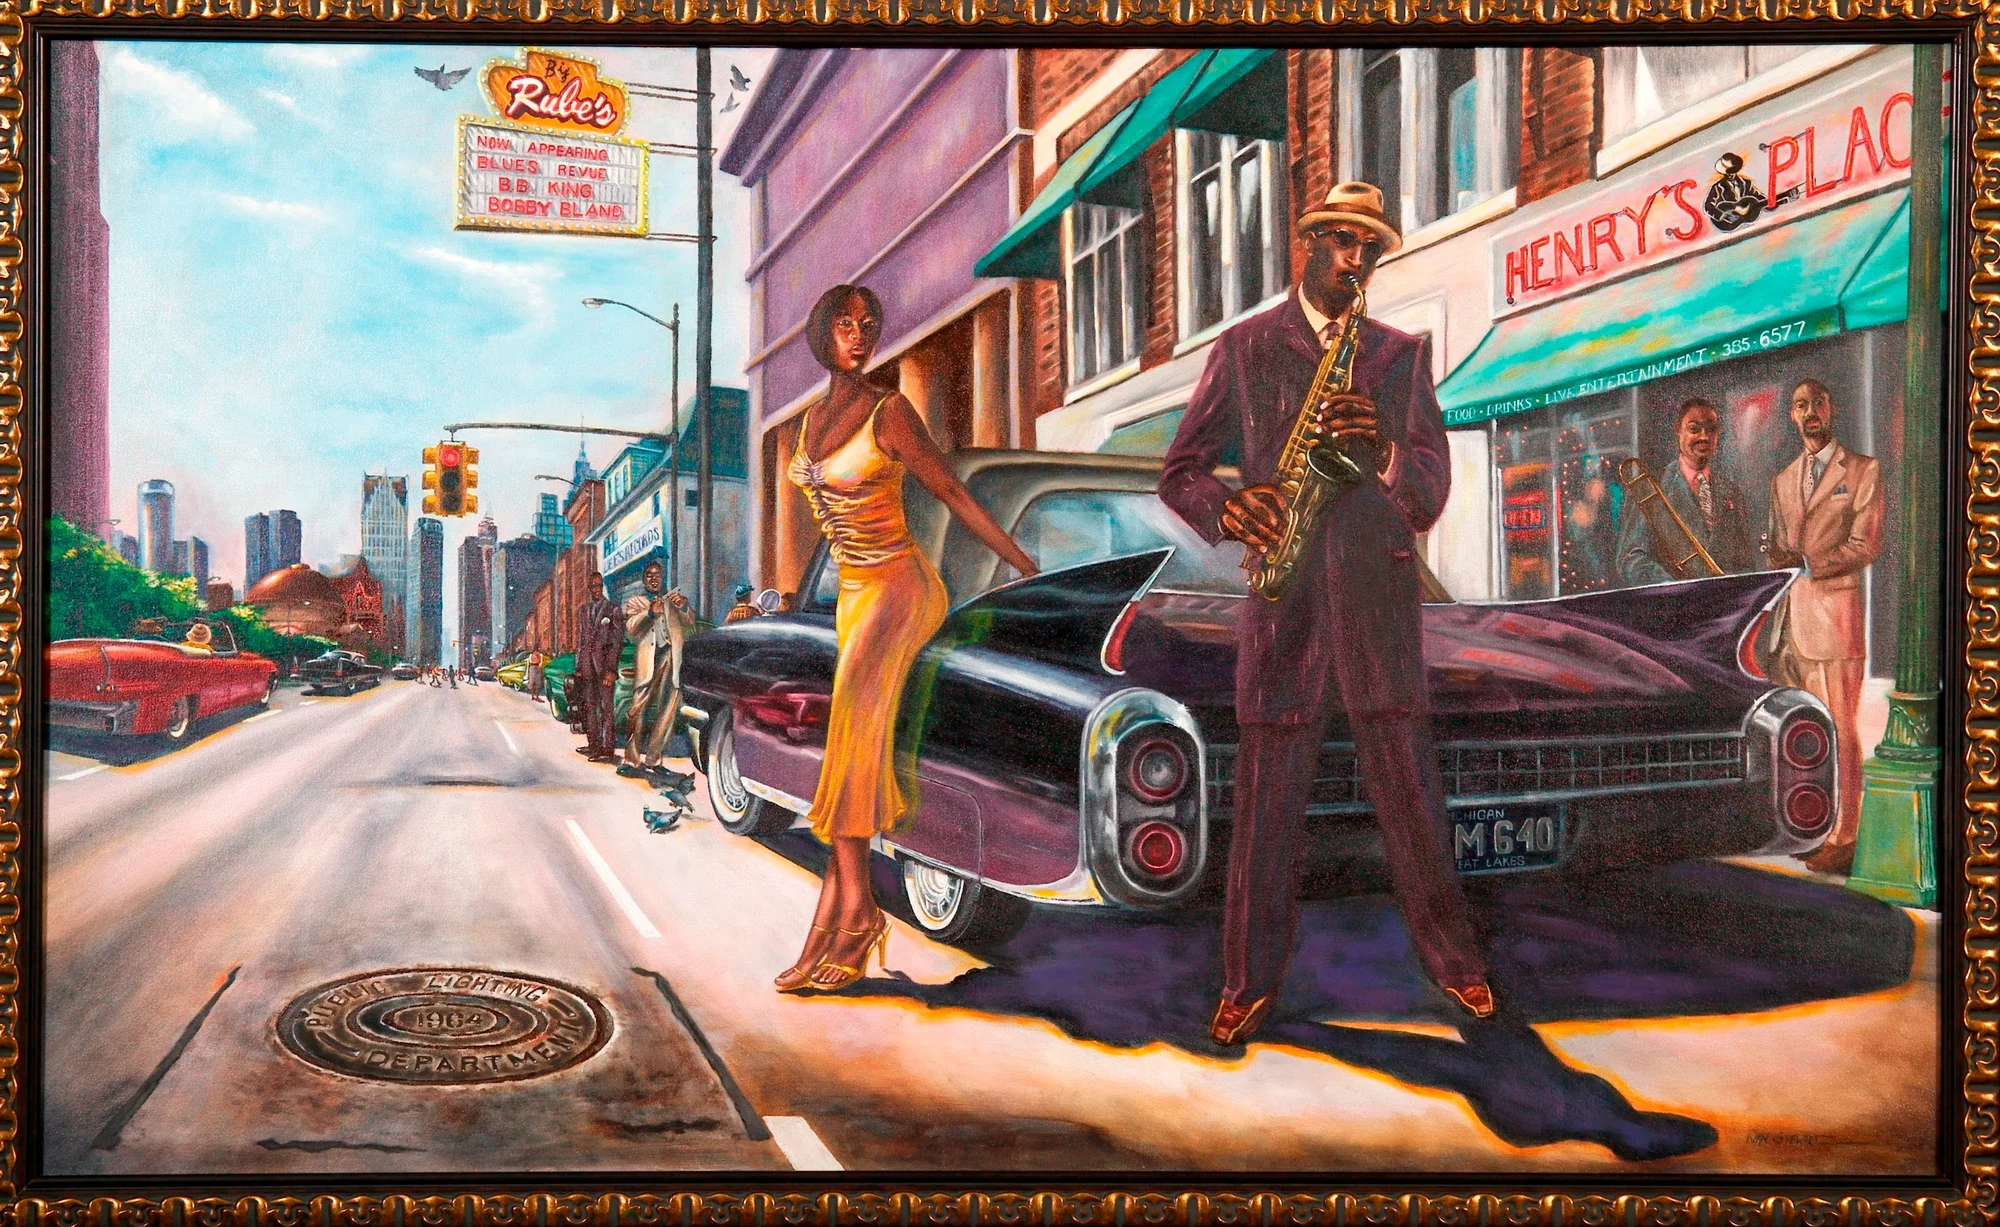 Oil painting of a man in a purple suit standing in front of a car playing the saxophone, with a woman standing against the car and two other men with instruments on the sidewalk.